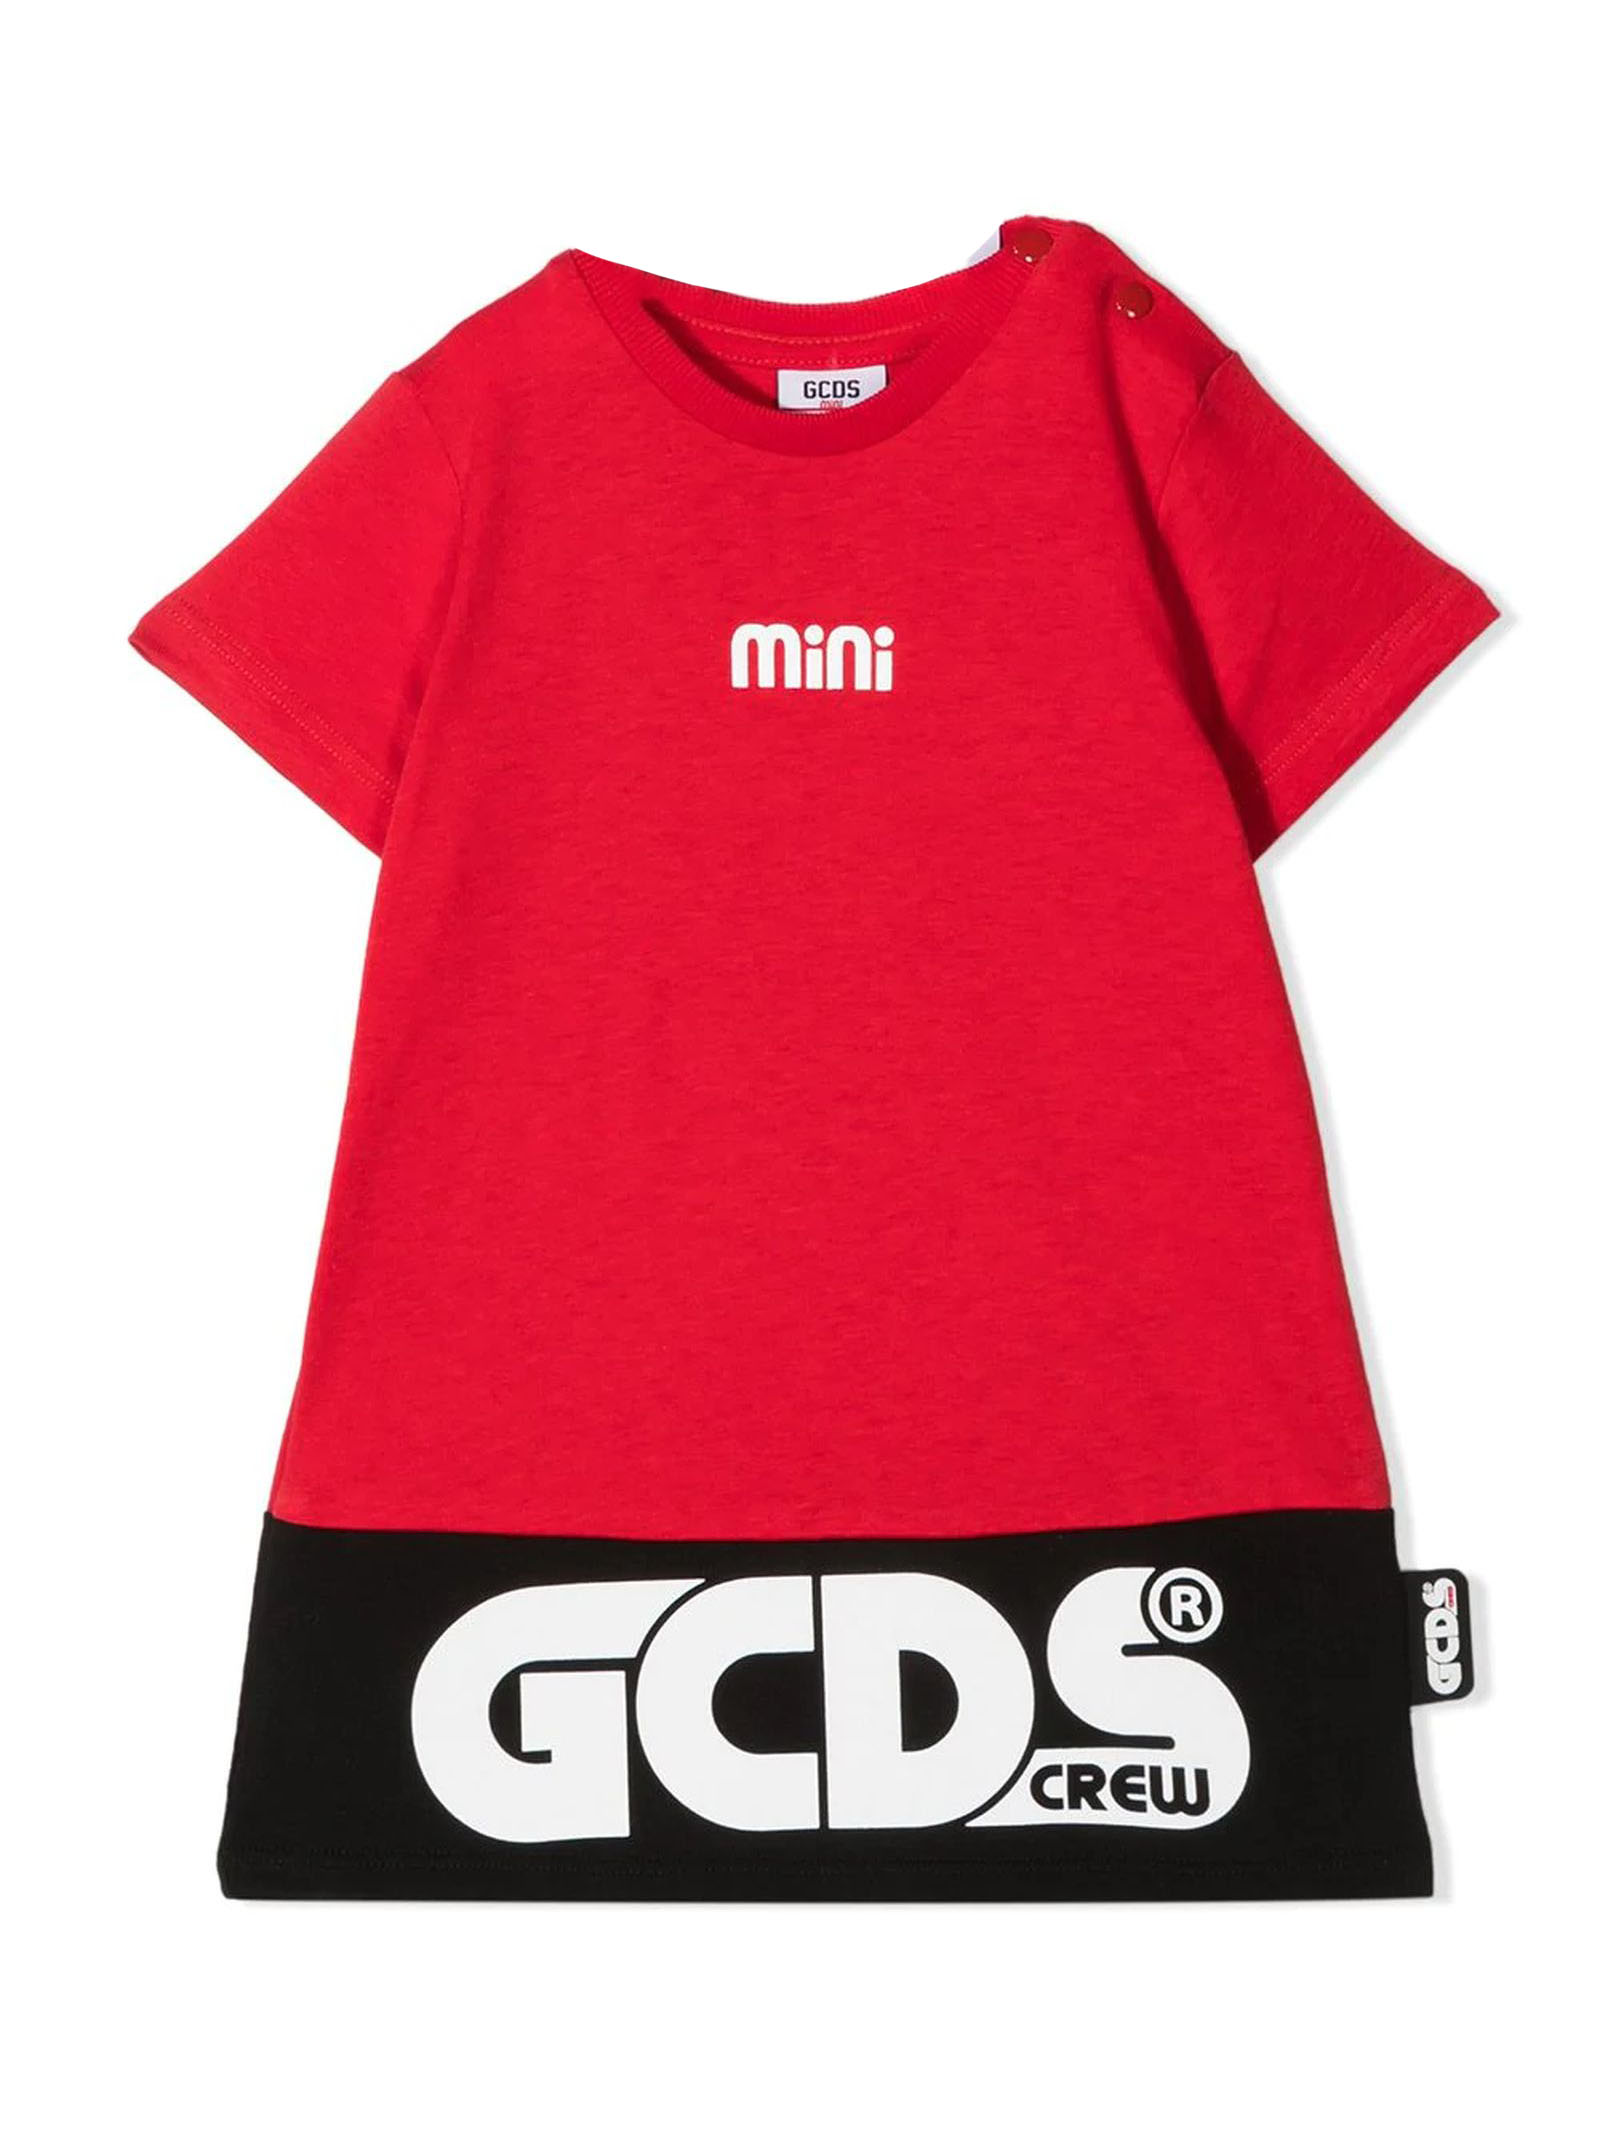 GCDS Red, Black And White Cotton Dress